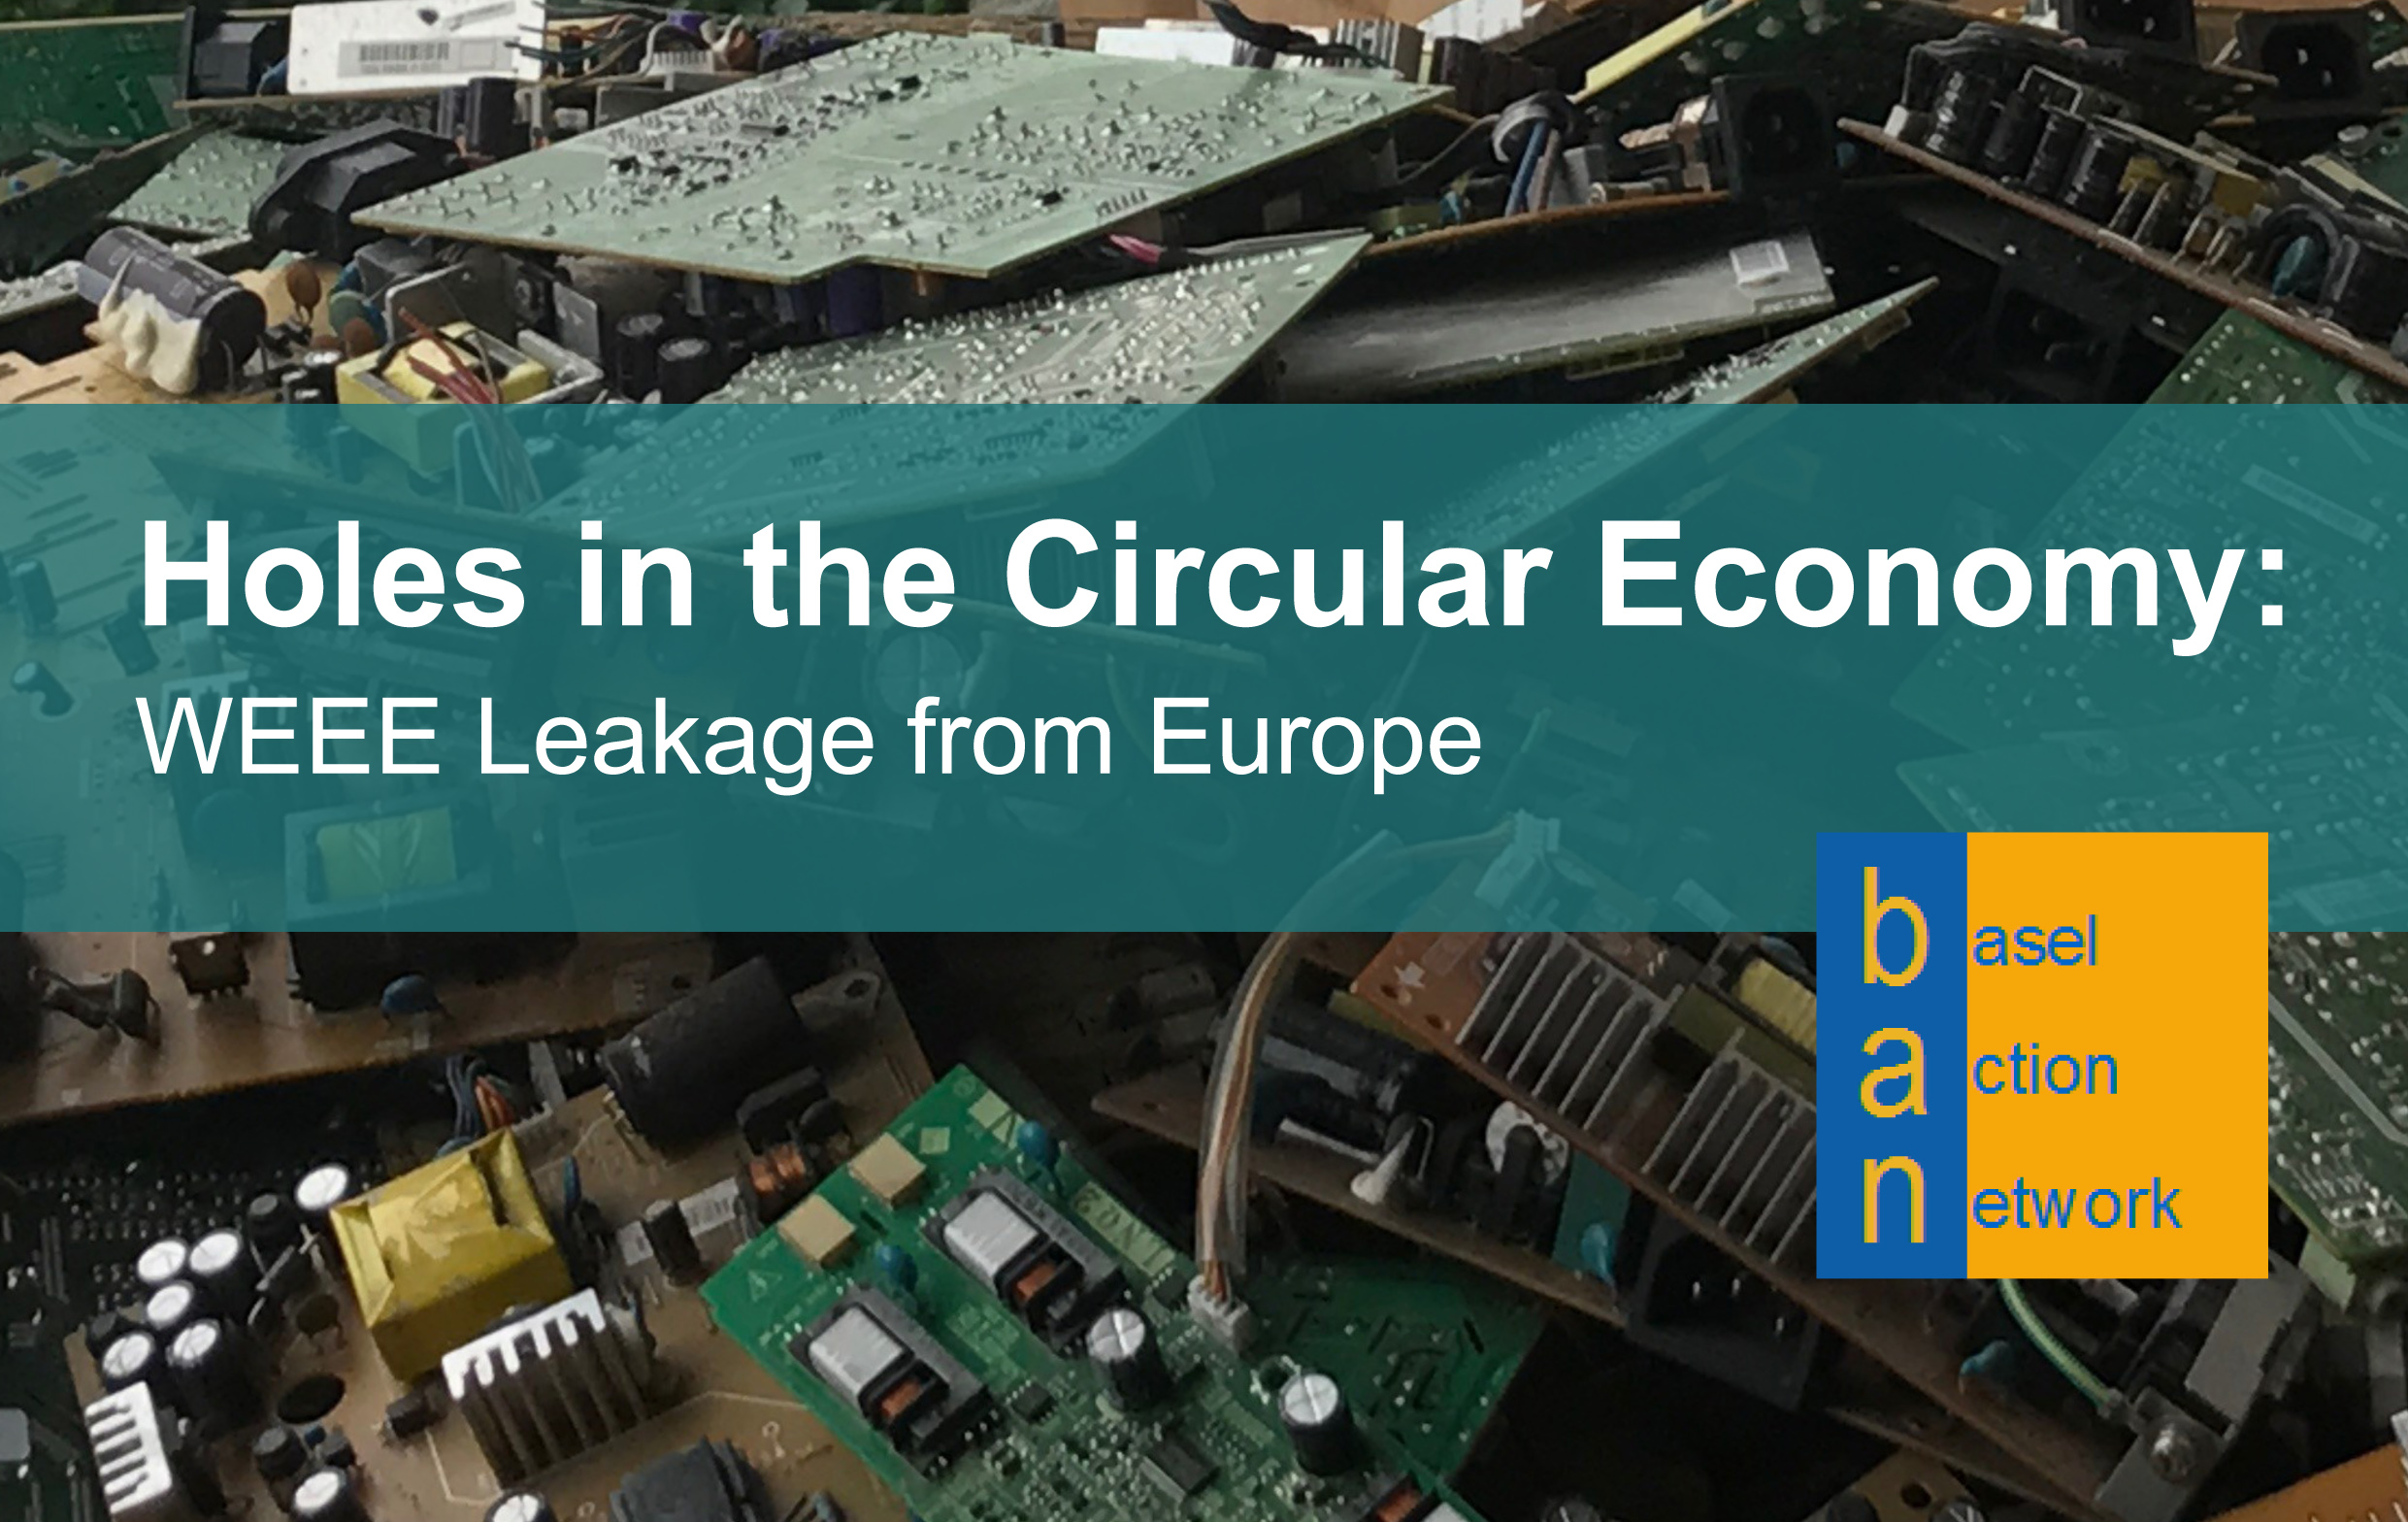 Holes-in-the-circular-economy-weee-leakage-from-Europe